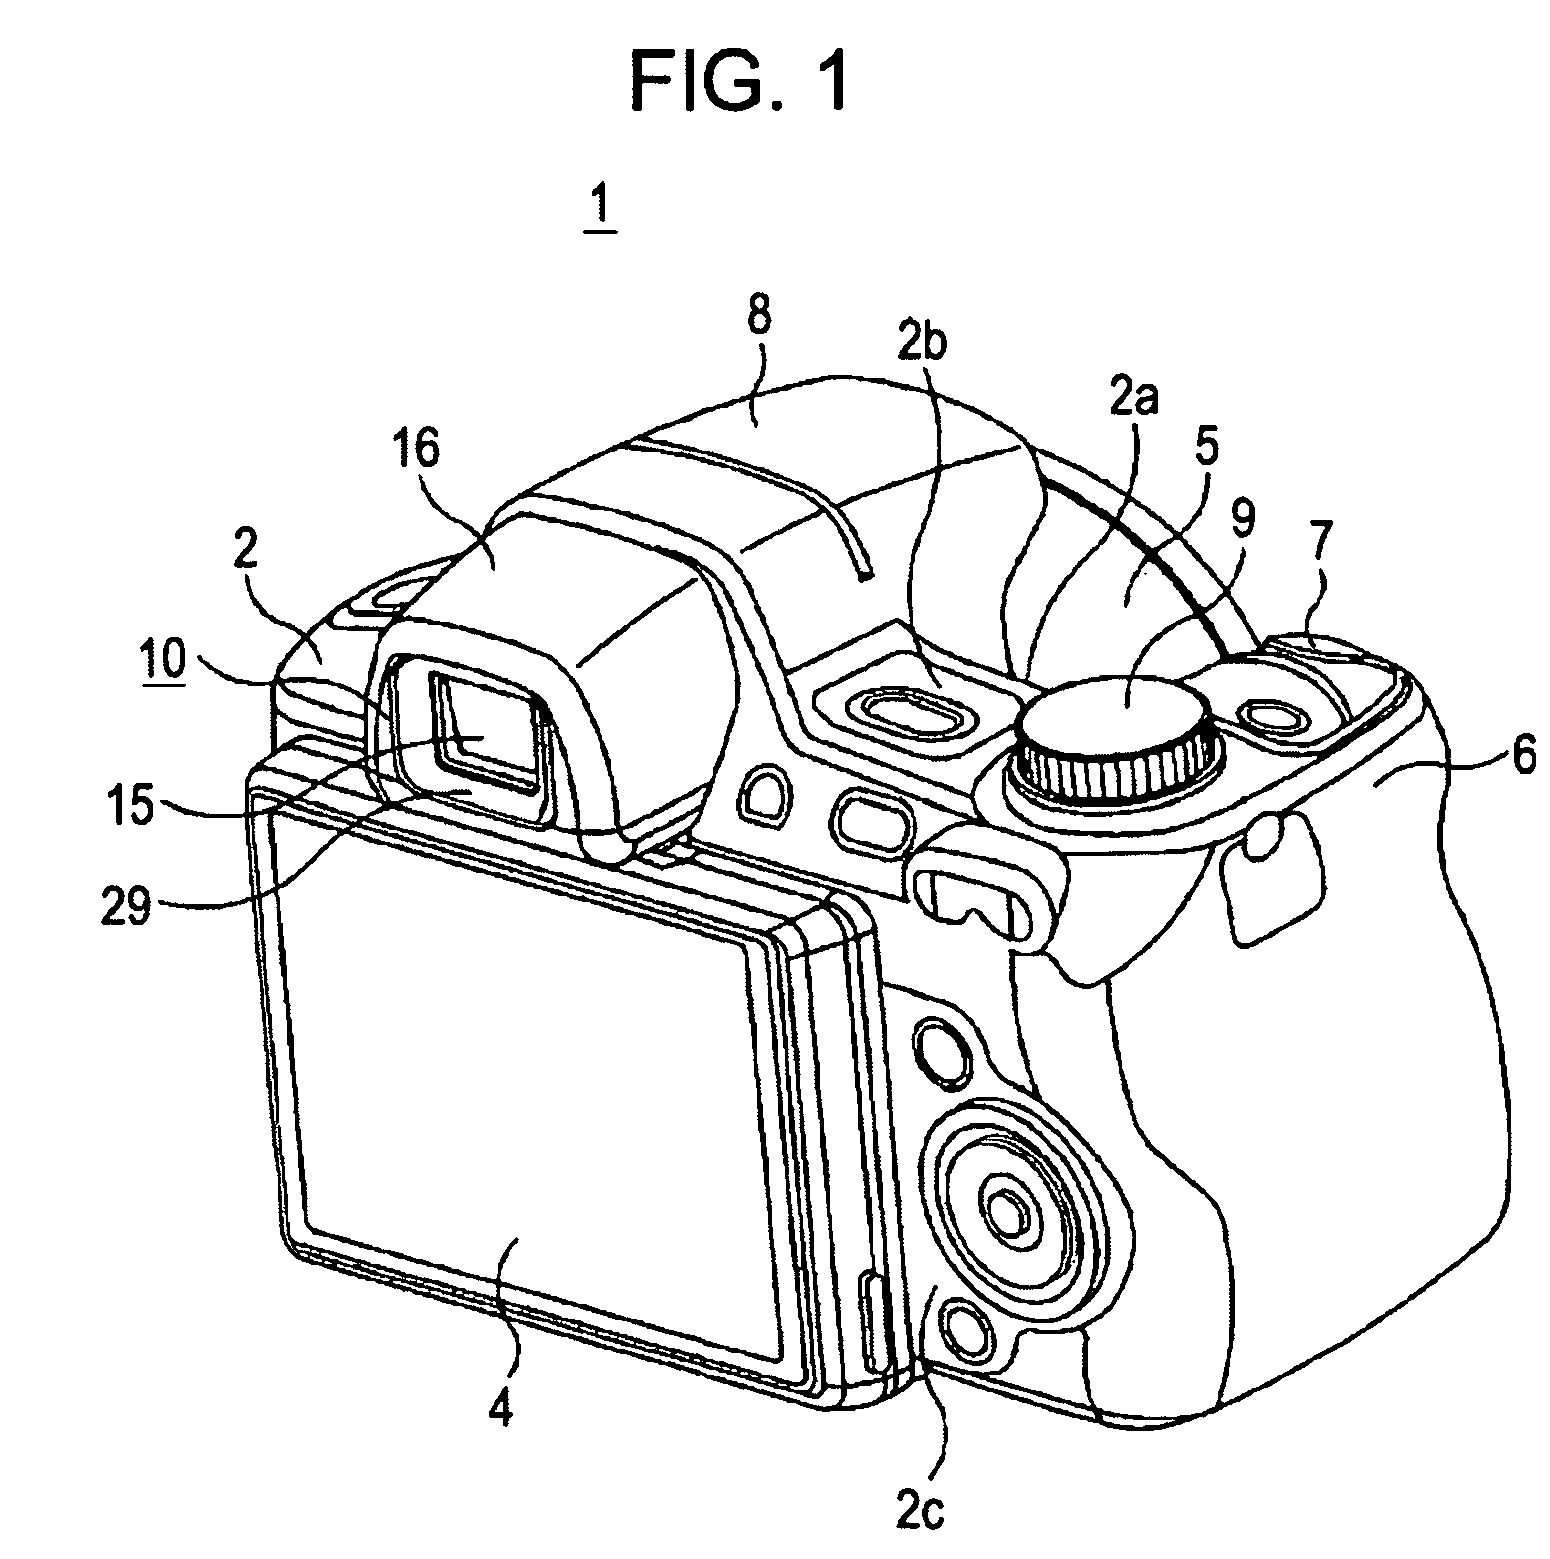 Imaging apparatus with a rotatable monitor